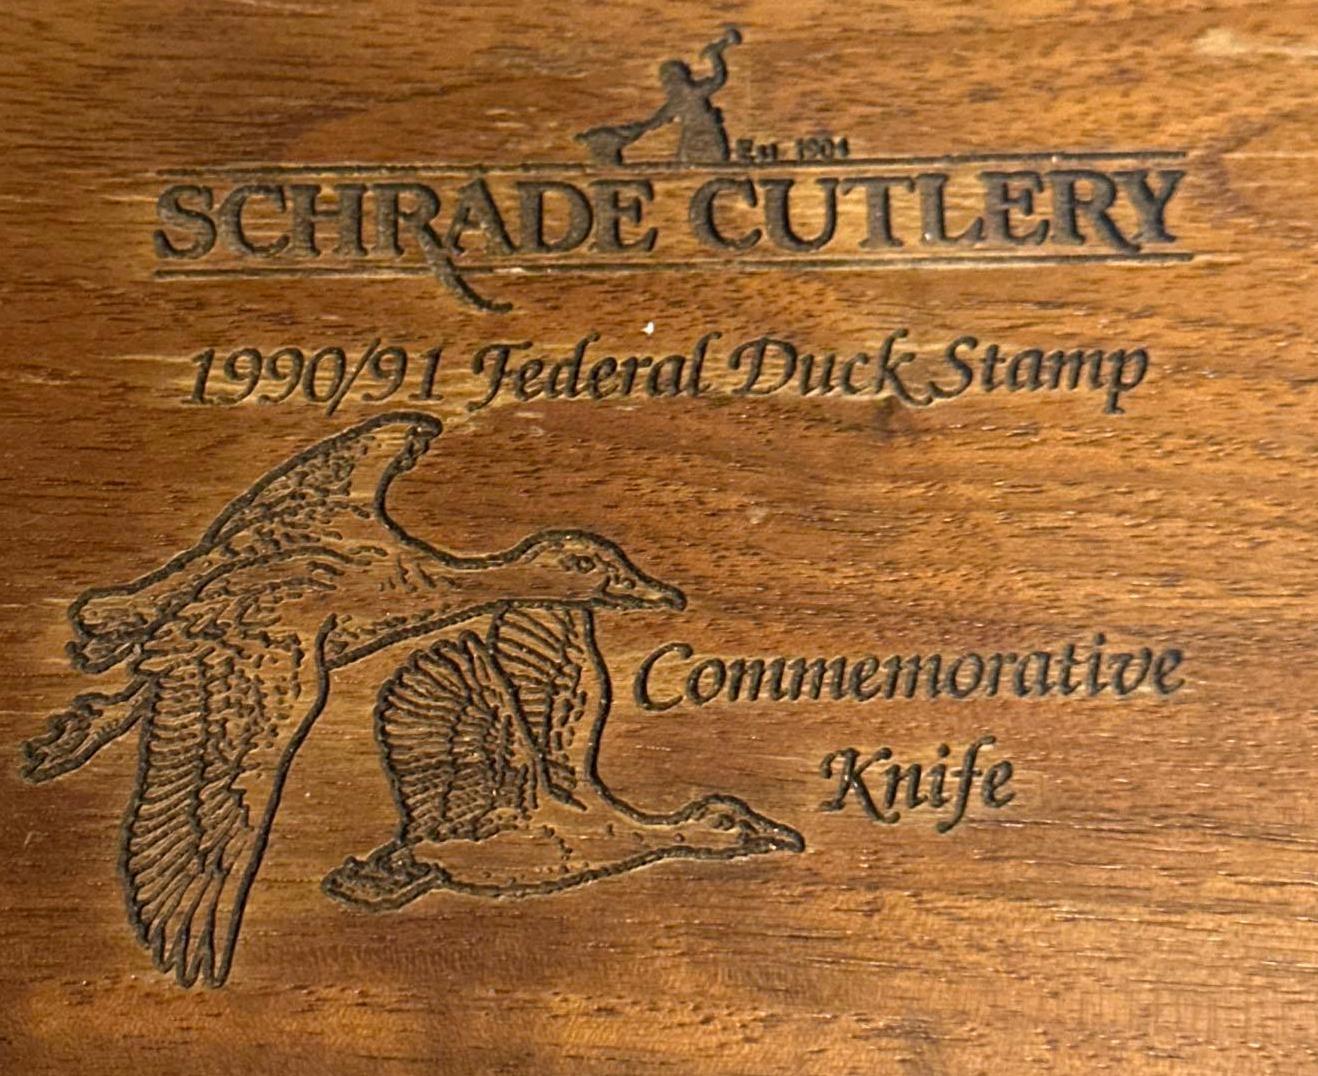 Schrade 895 Knife and 1990/91 Federal Duck stamp Commemorative